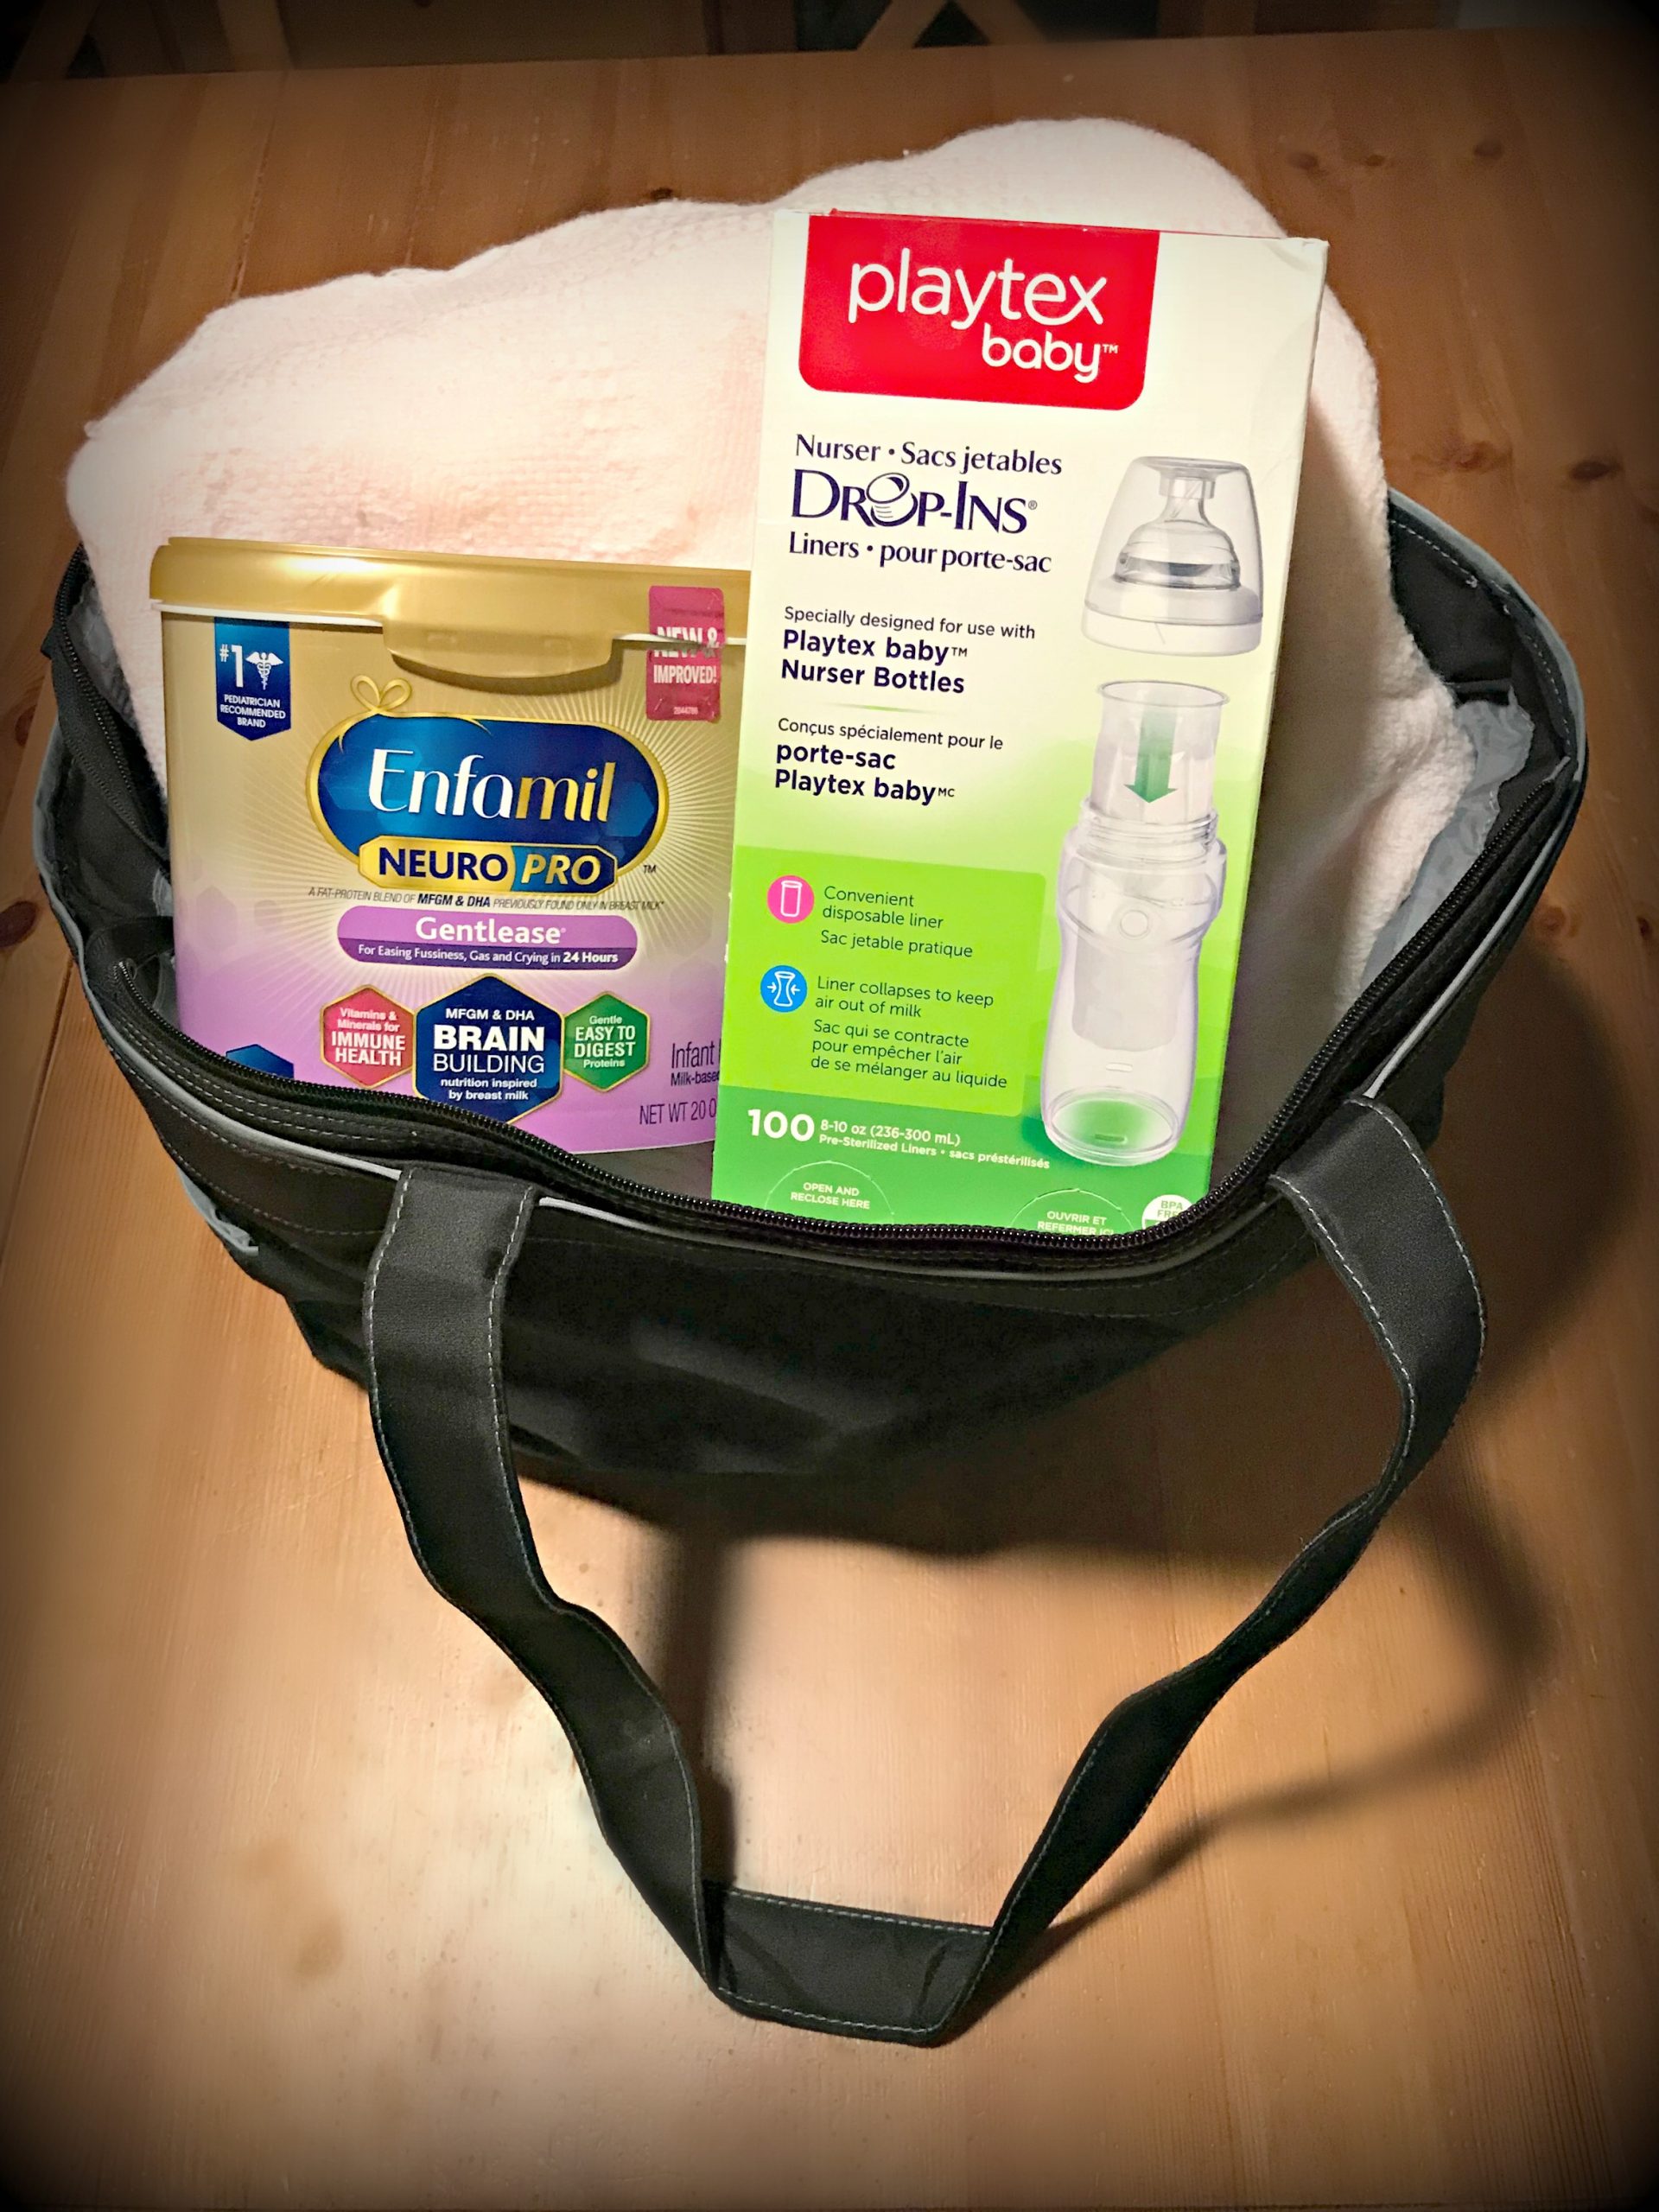 Make Baby’s First Year Easier with Enfamil® NeuroPro and Playtex Baby™ Nurser Bottles with Drop-Ins® Liners